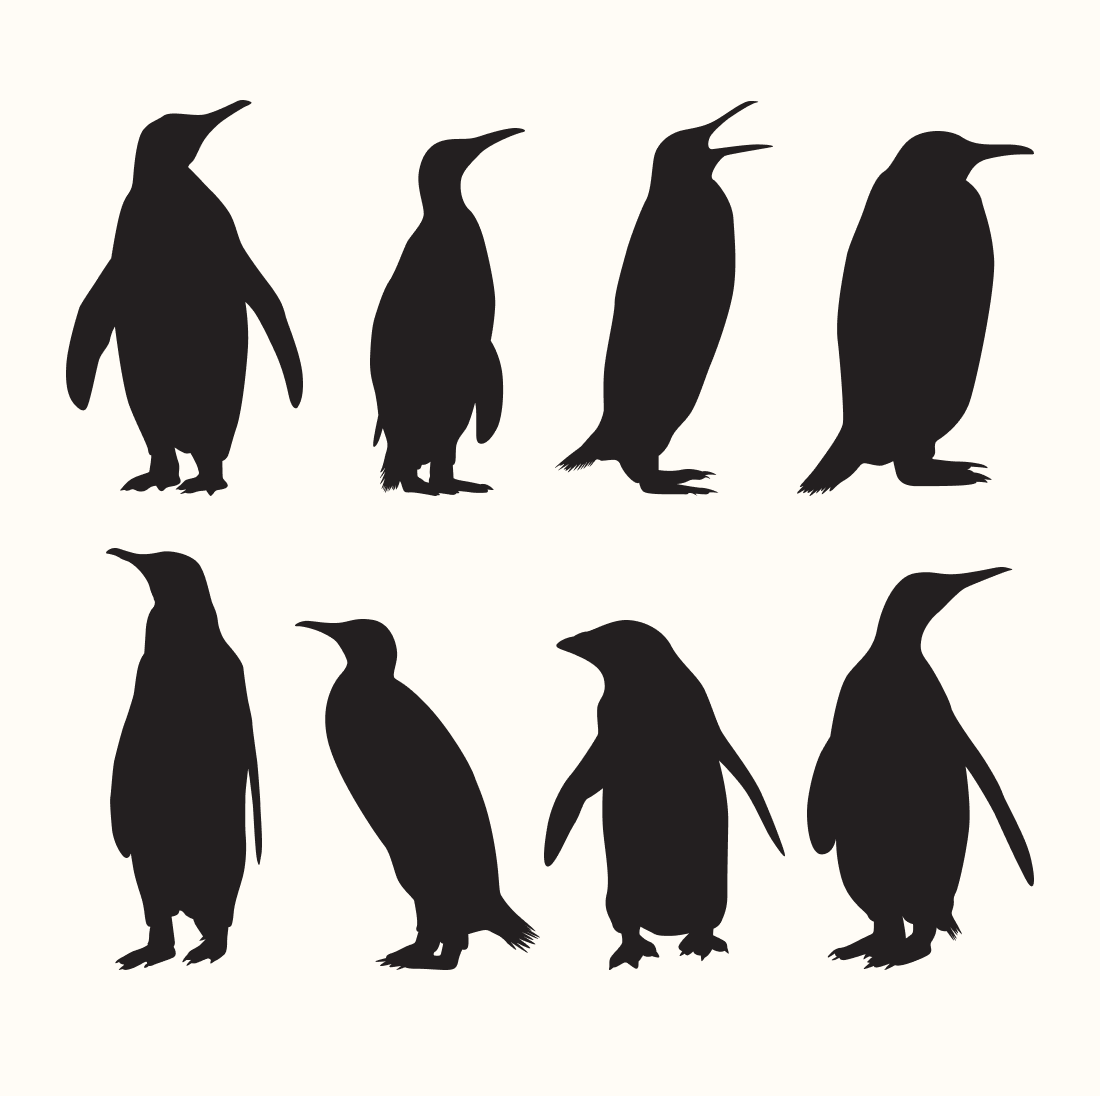 Set of penguins silhouettes on a white background.